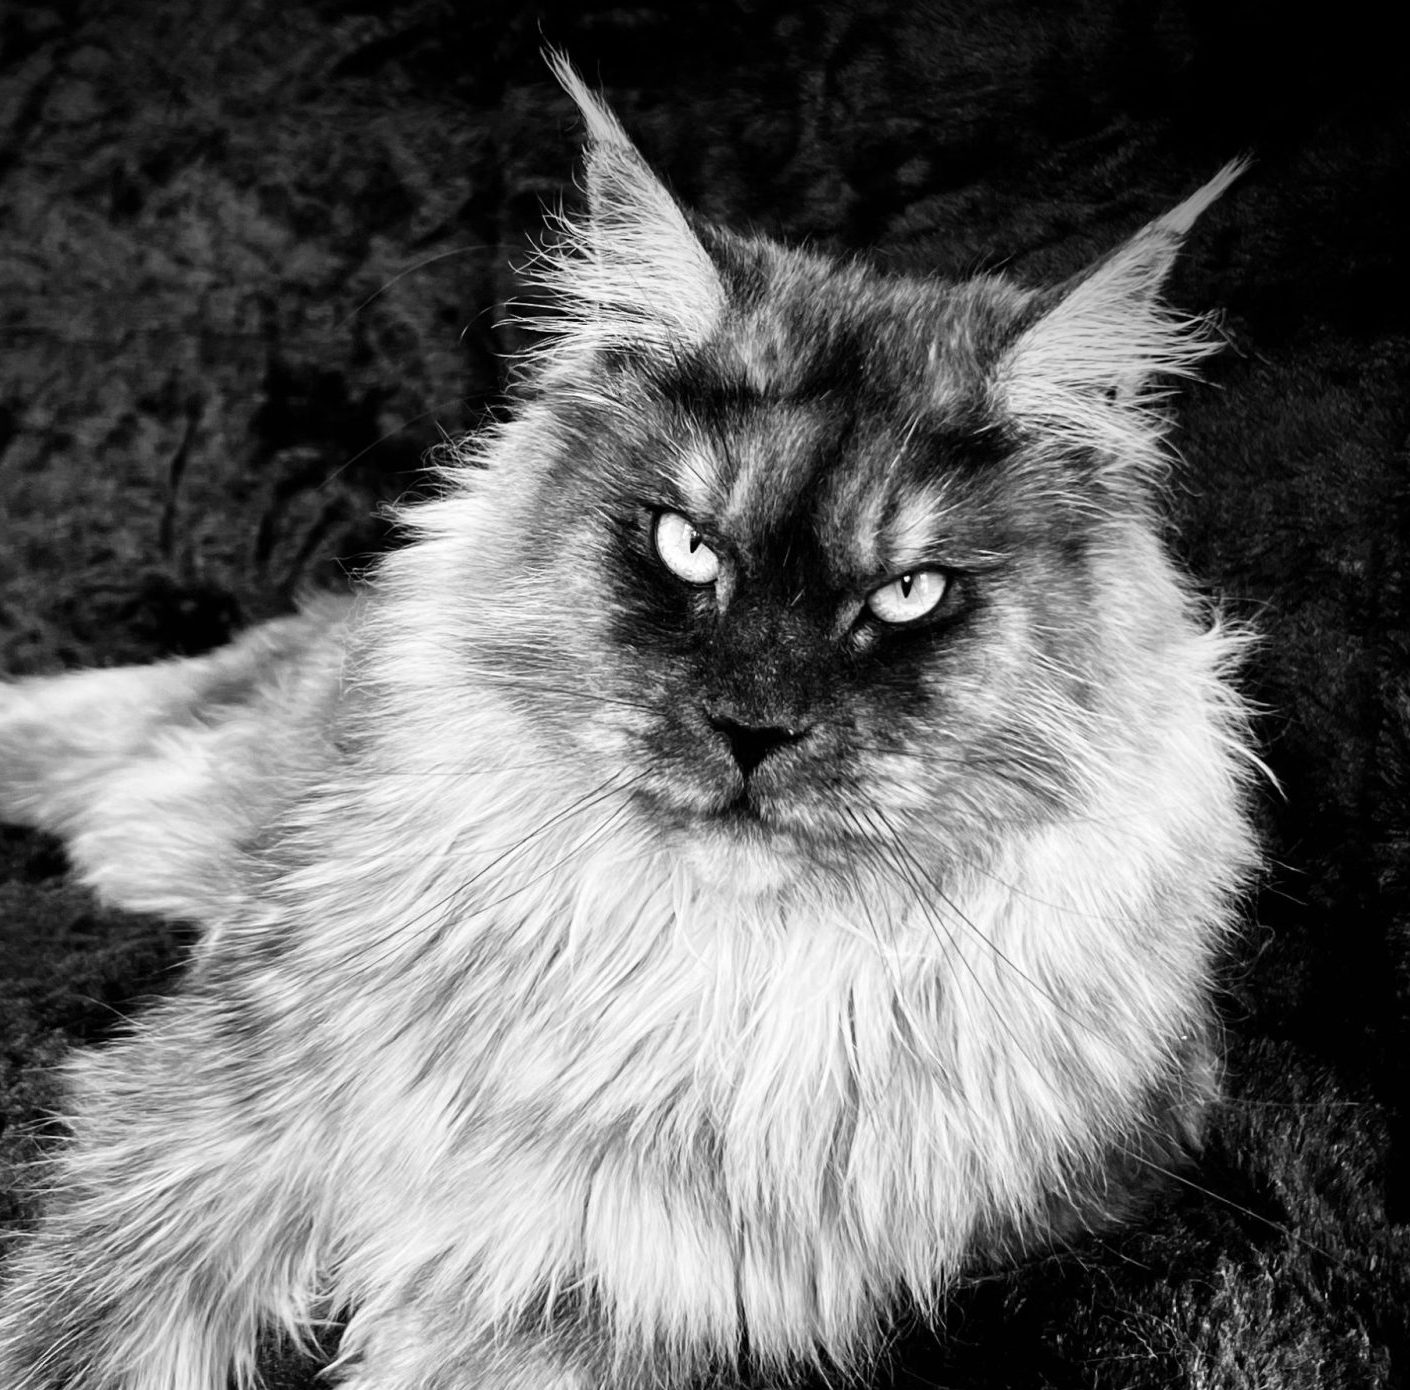 Photo Gallery of Moosehead Maine Coons | Greenville, Maine